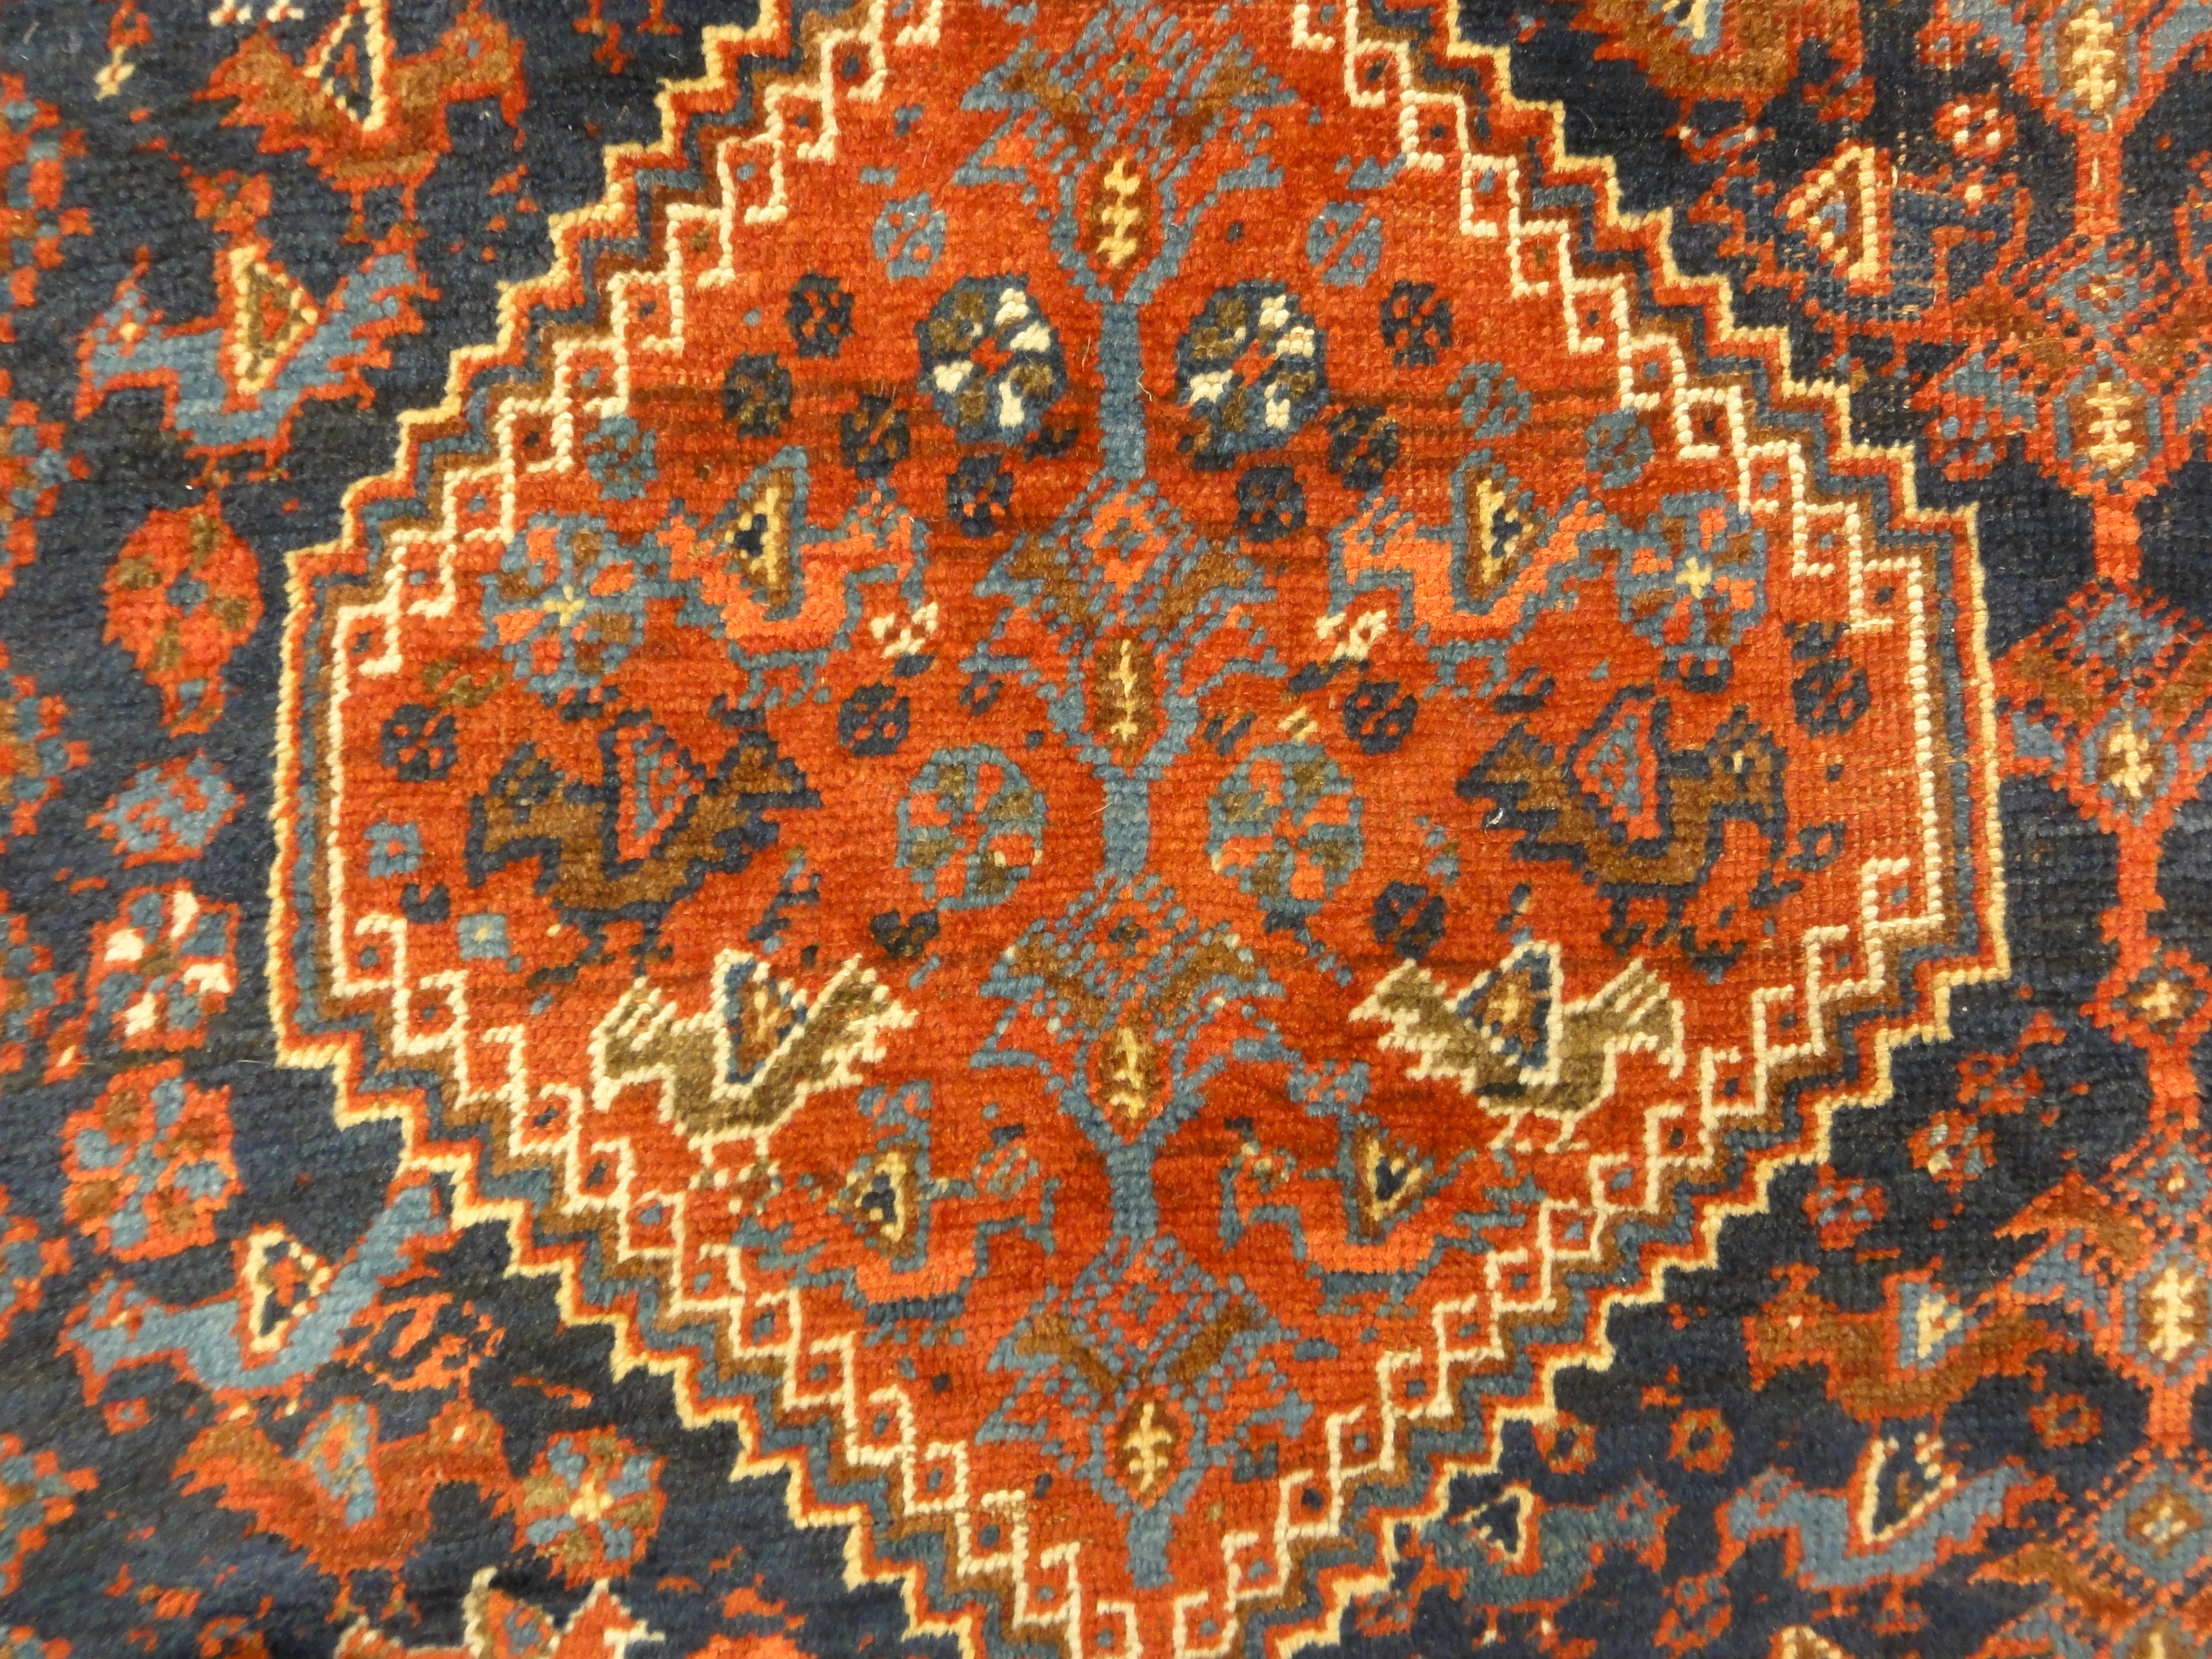 Antique Khamseh Chicken Rug. A piece of genuine authentic antique woven carpet art sold by Santa Barbara Design Center, Rugs and More.